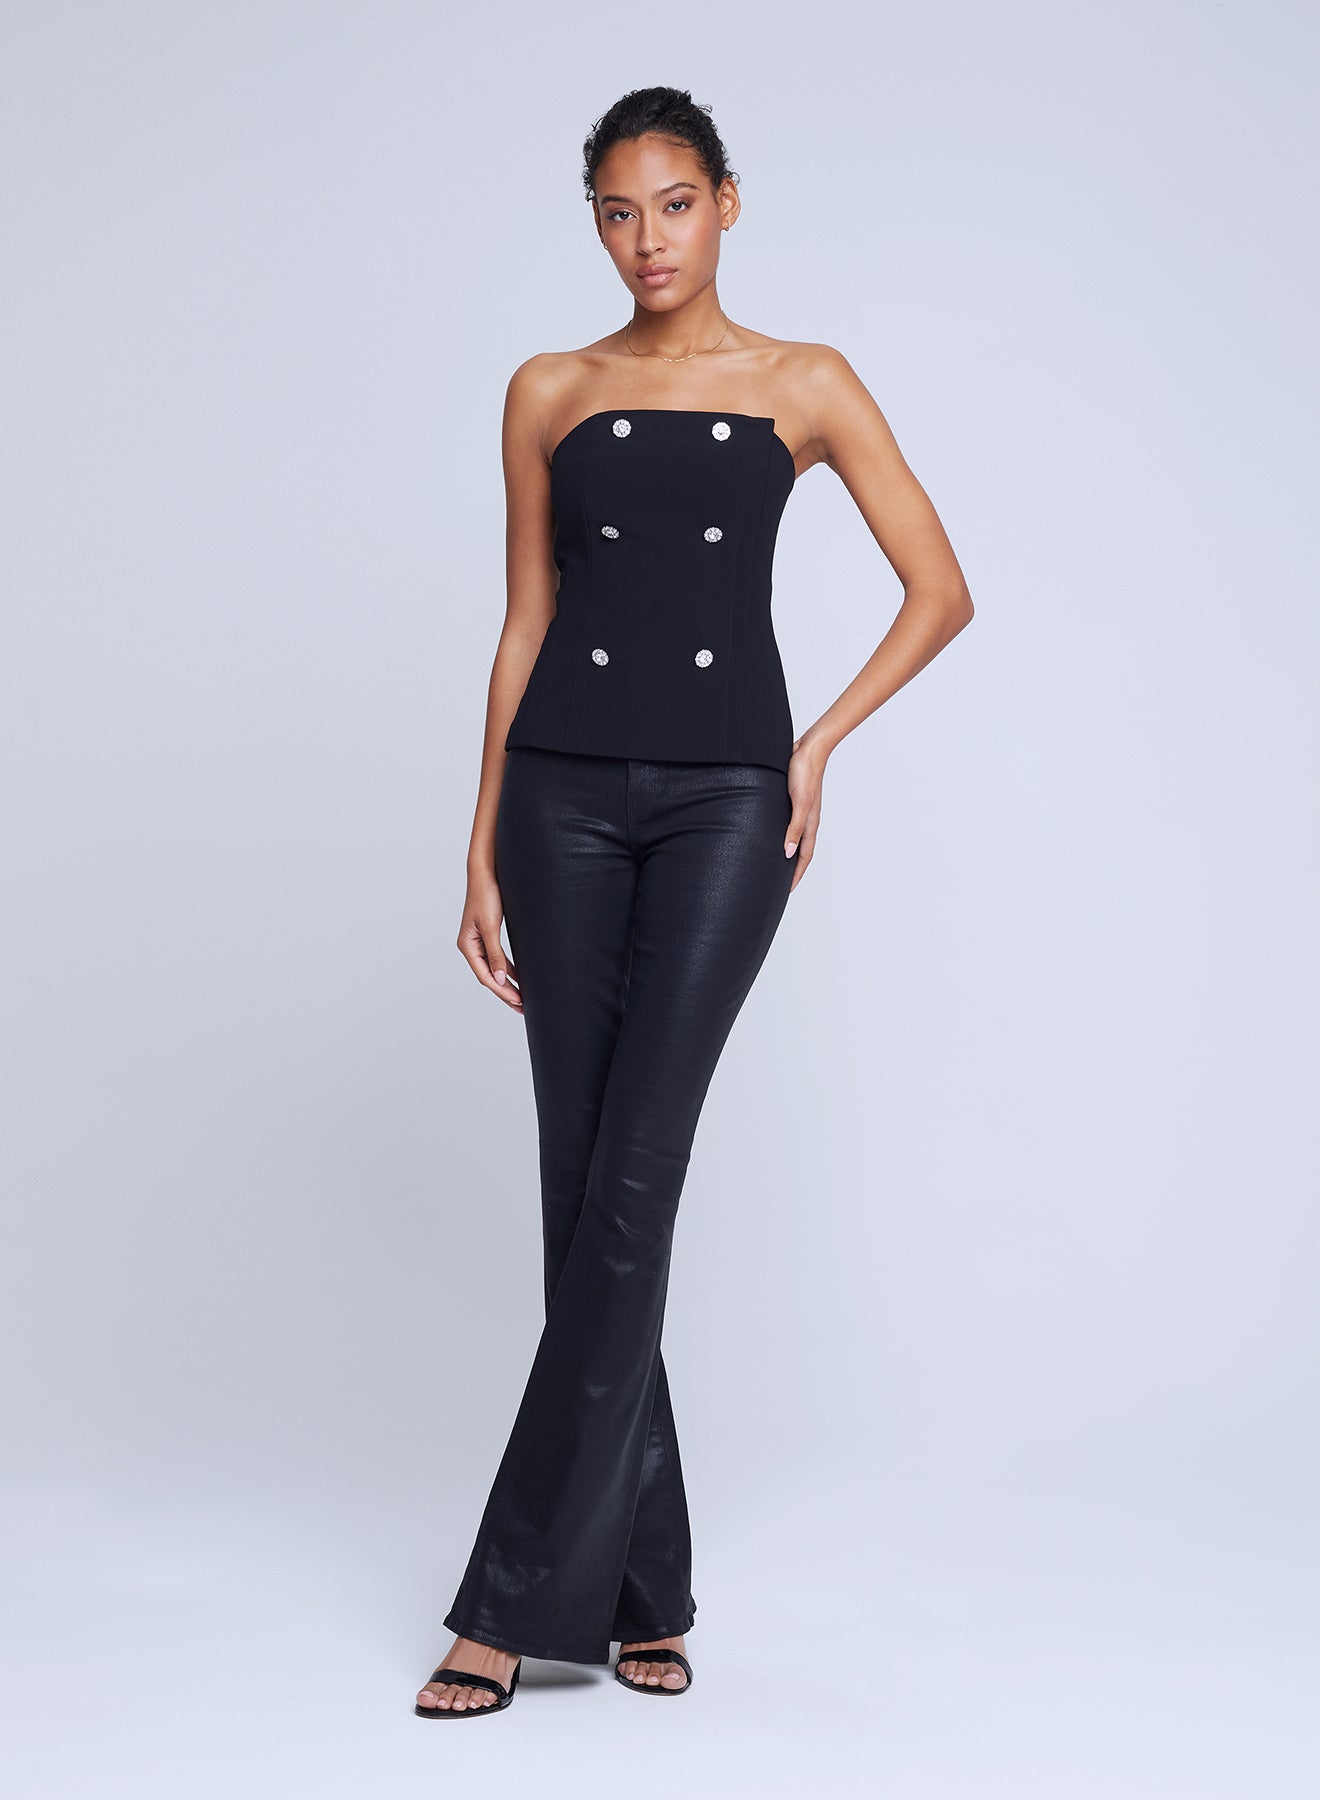 Fay Strapless Bustier by L'agence